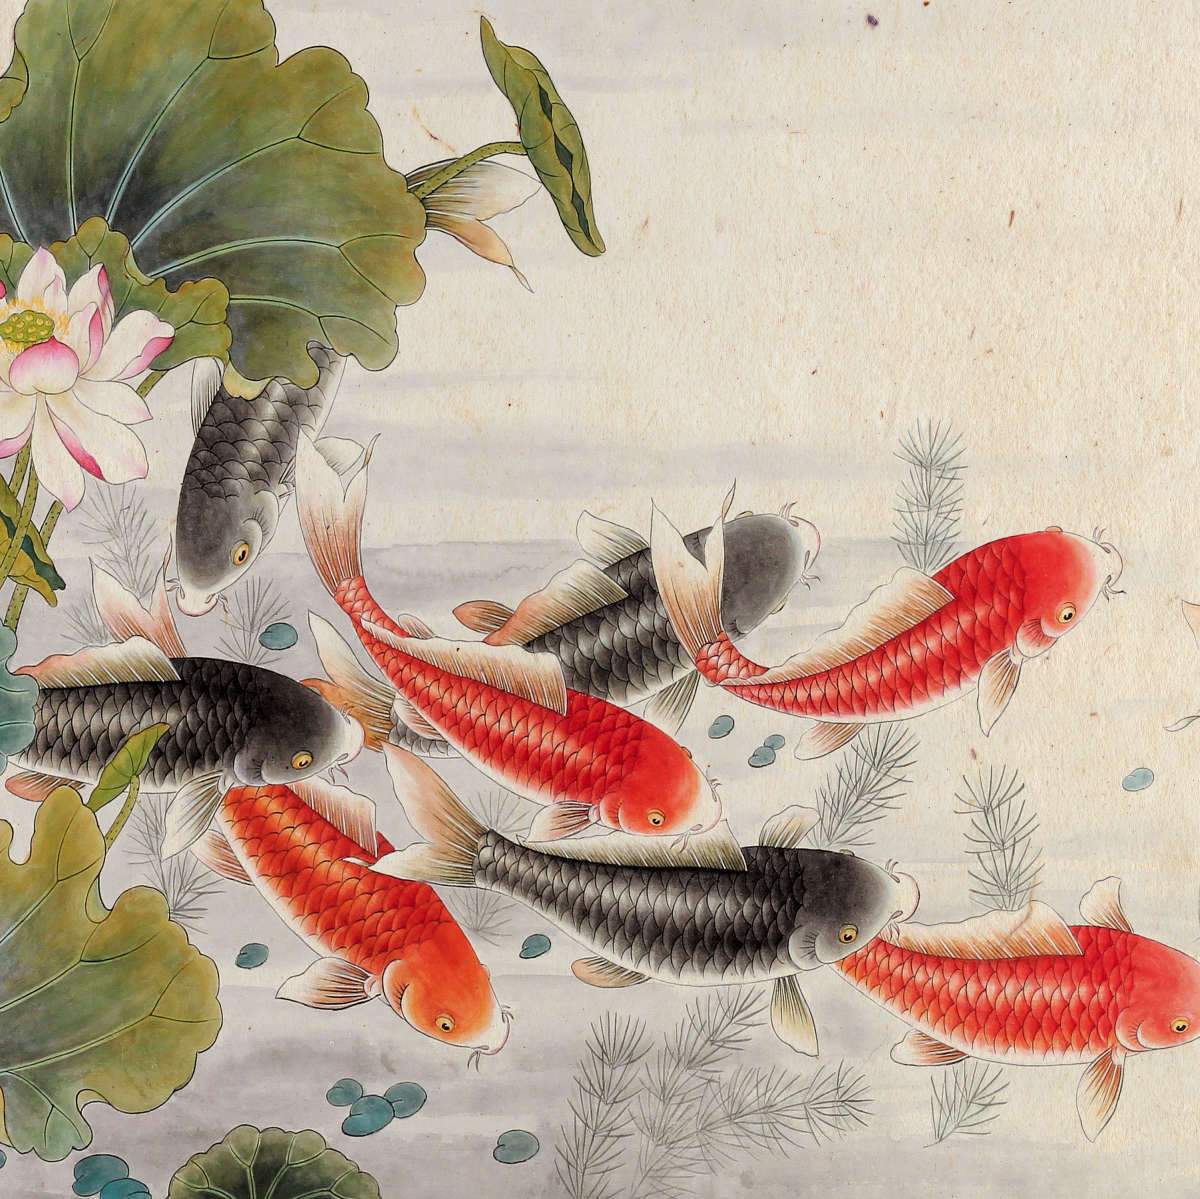 White Koi Carp Fish In a Pond Wall Art. Watercolor painting 11,5